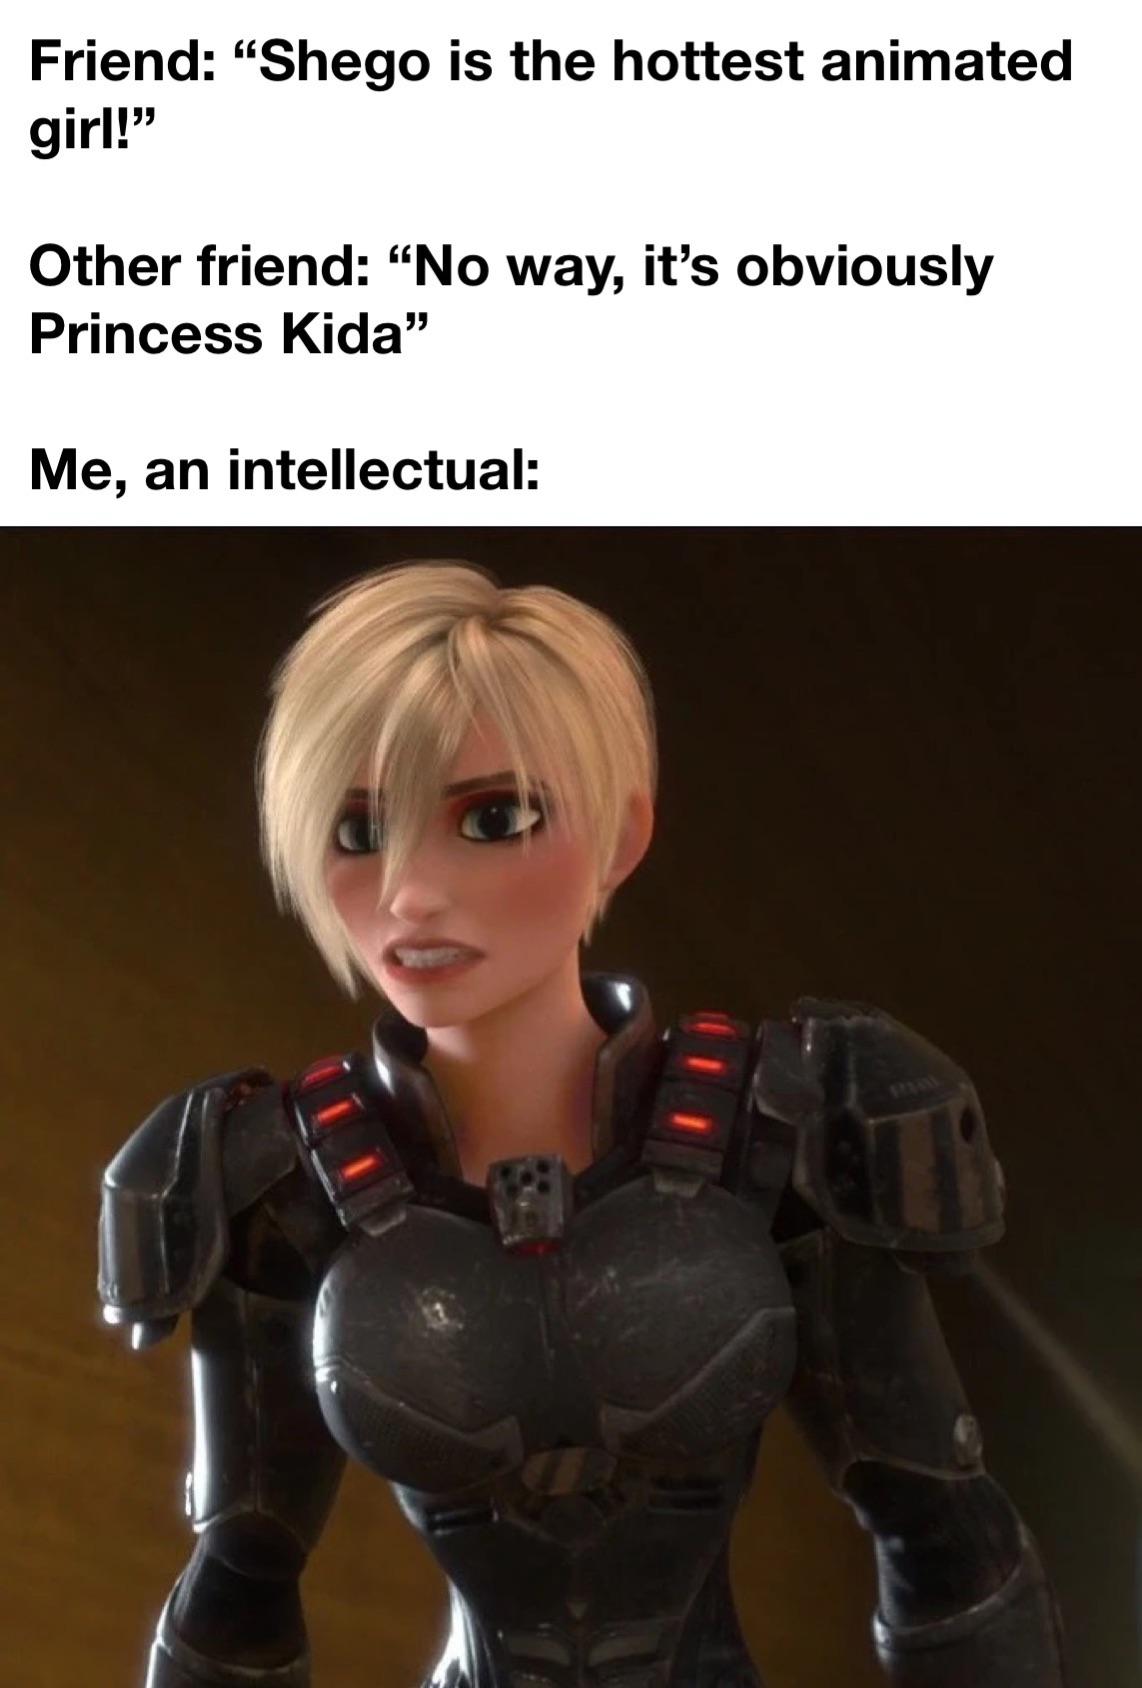 dank memes - wreck it ralph bug lady - Friend "Shego is the hottest animated girl!" Other friend "No way, it's obviously Princess Kida" Me, an intellectual